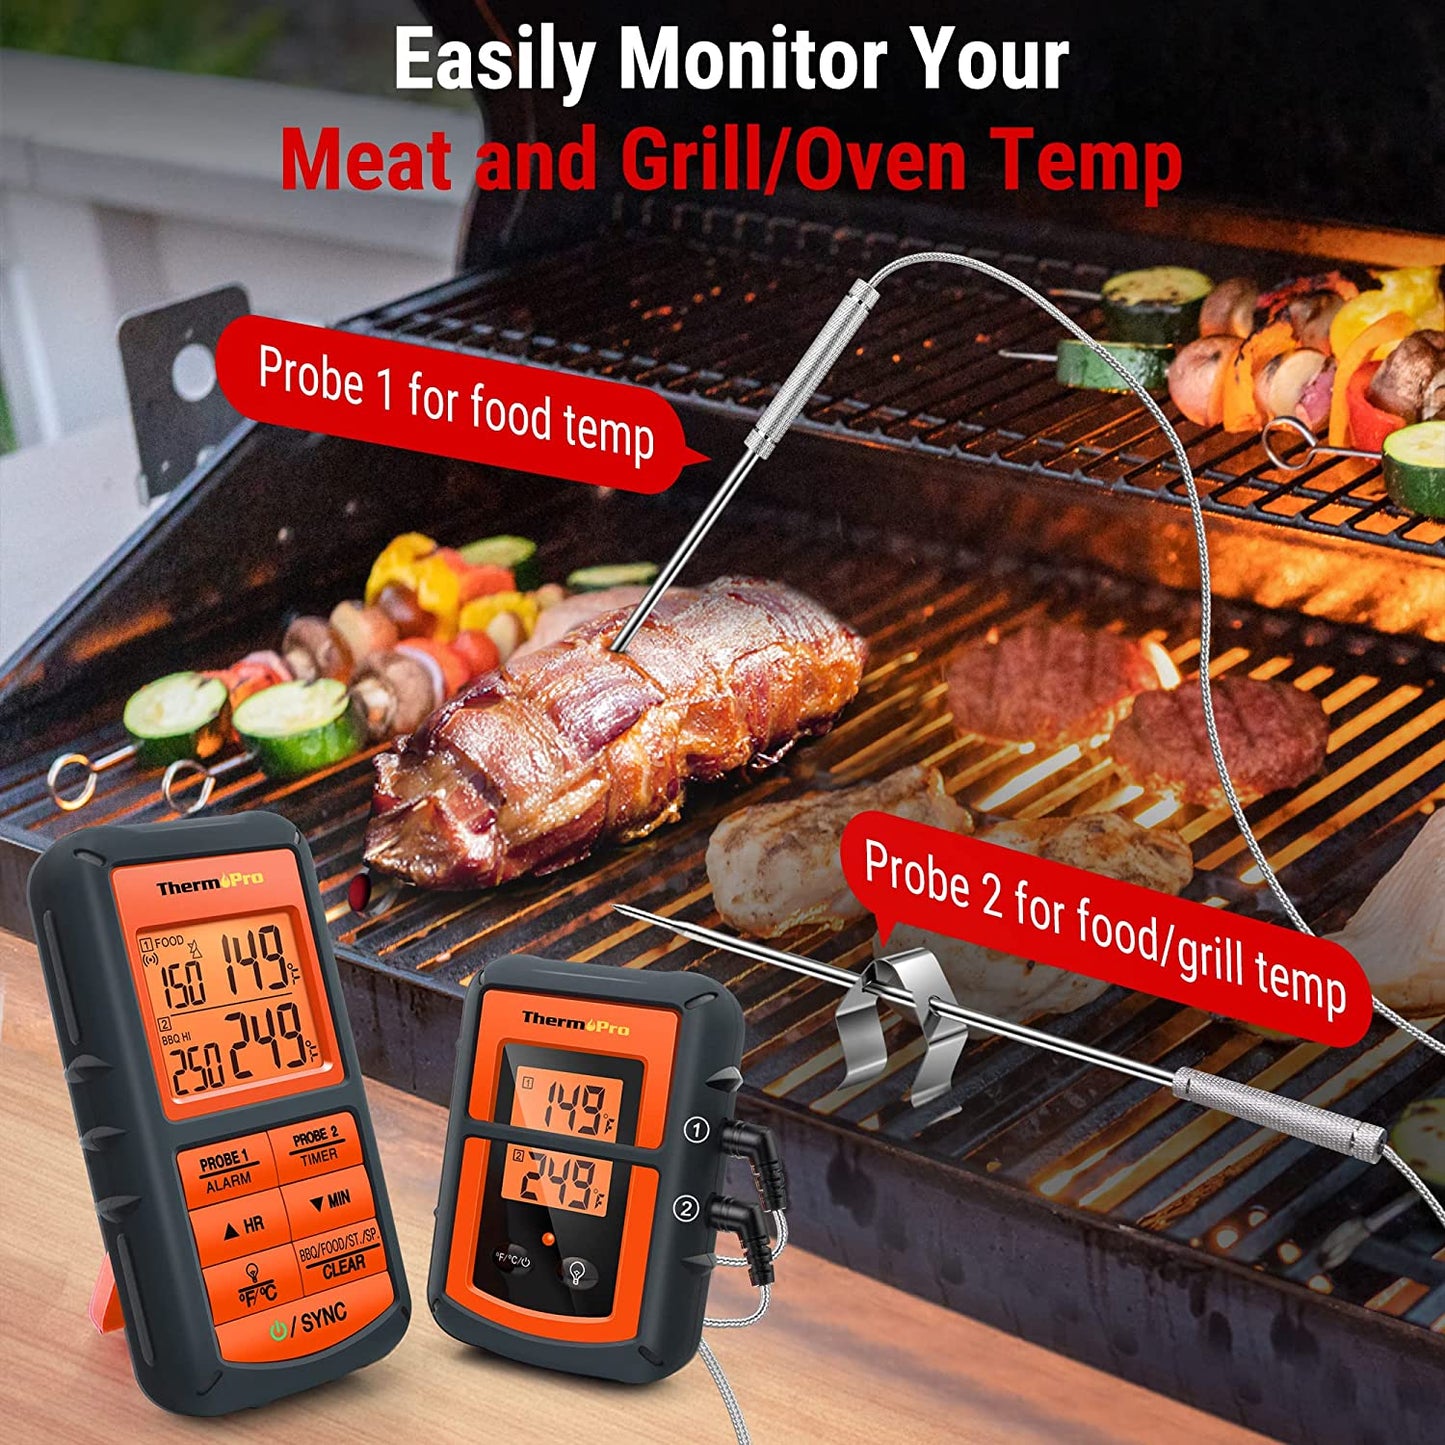 ThermoPro TP20 Wireless Remote Digital Cooking Food Meat Thermometer with Dual Probe